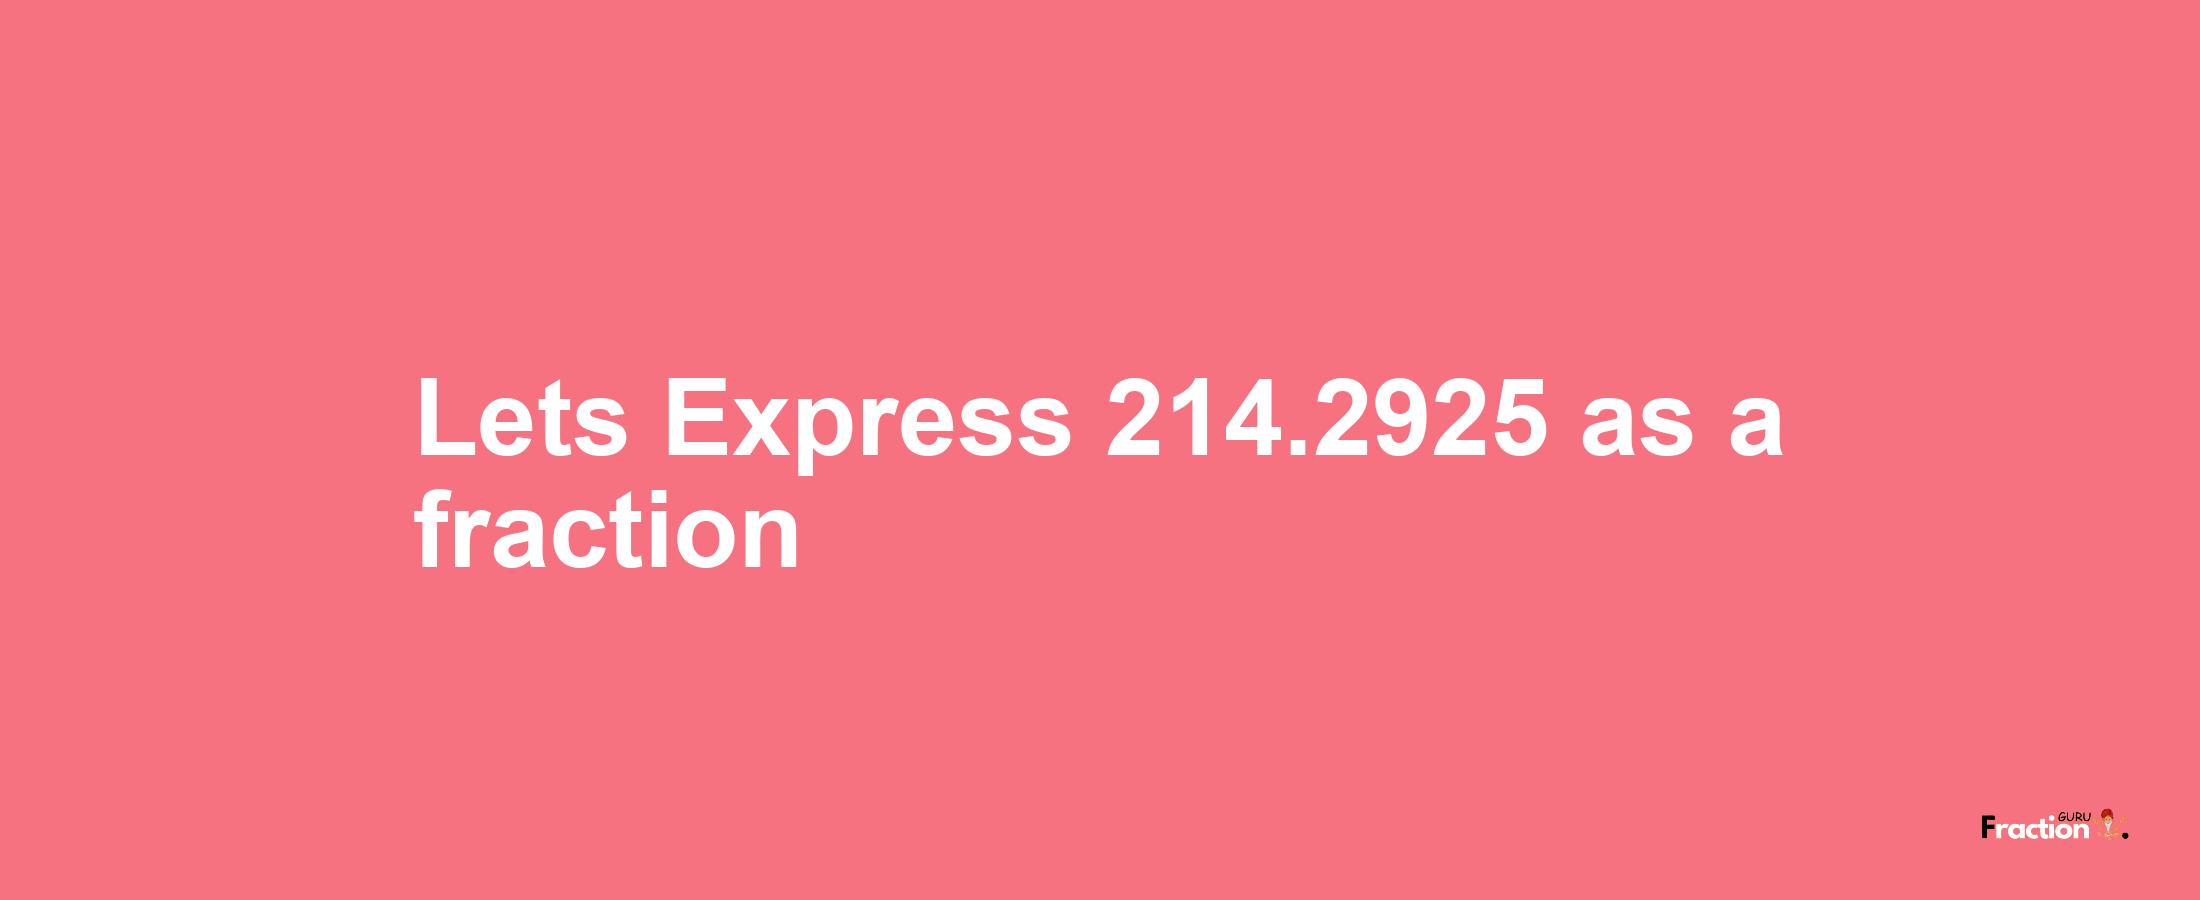 Lets Express 214.2925 as afraction